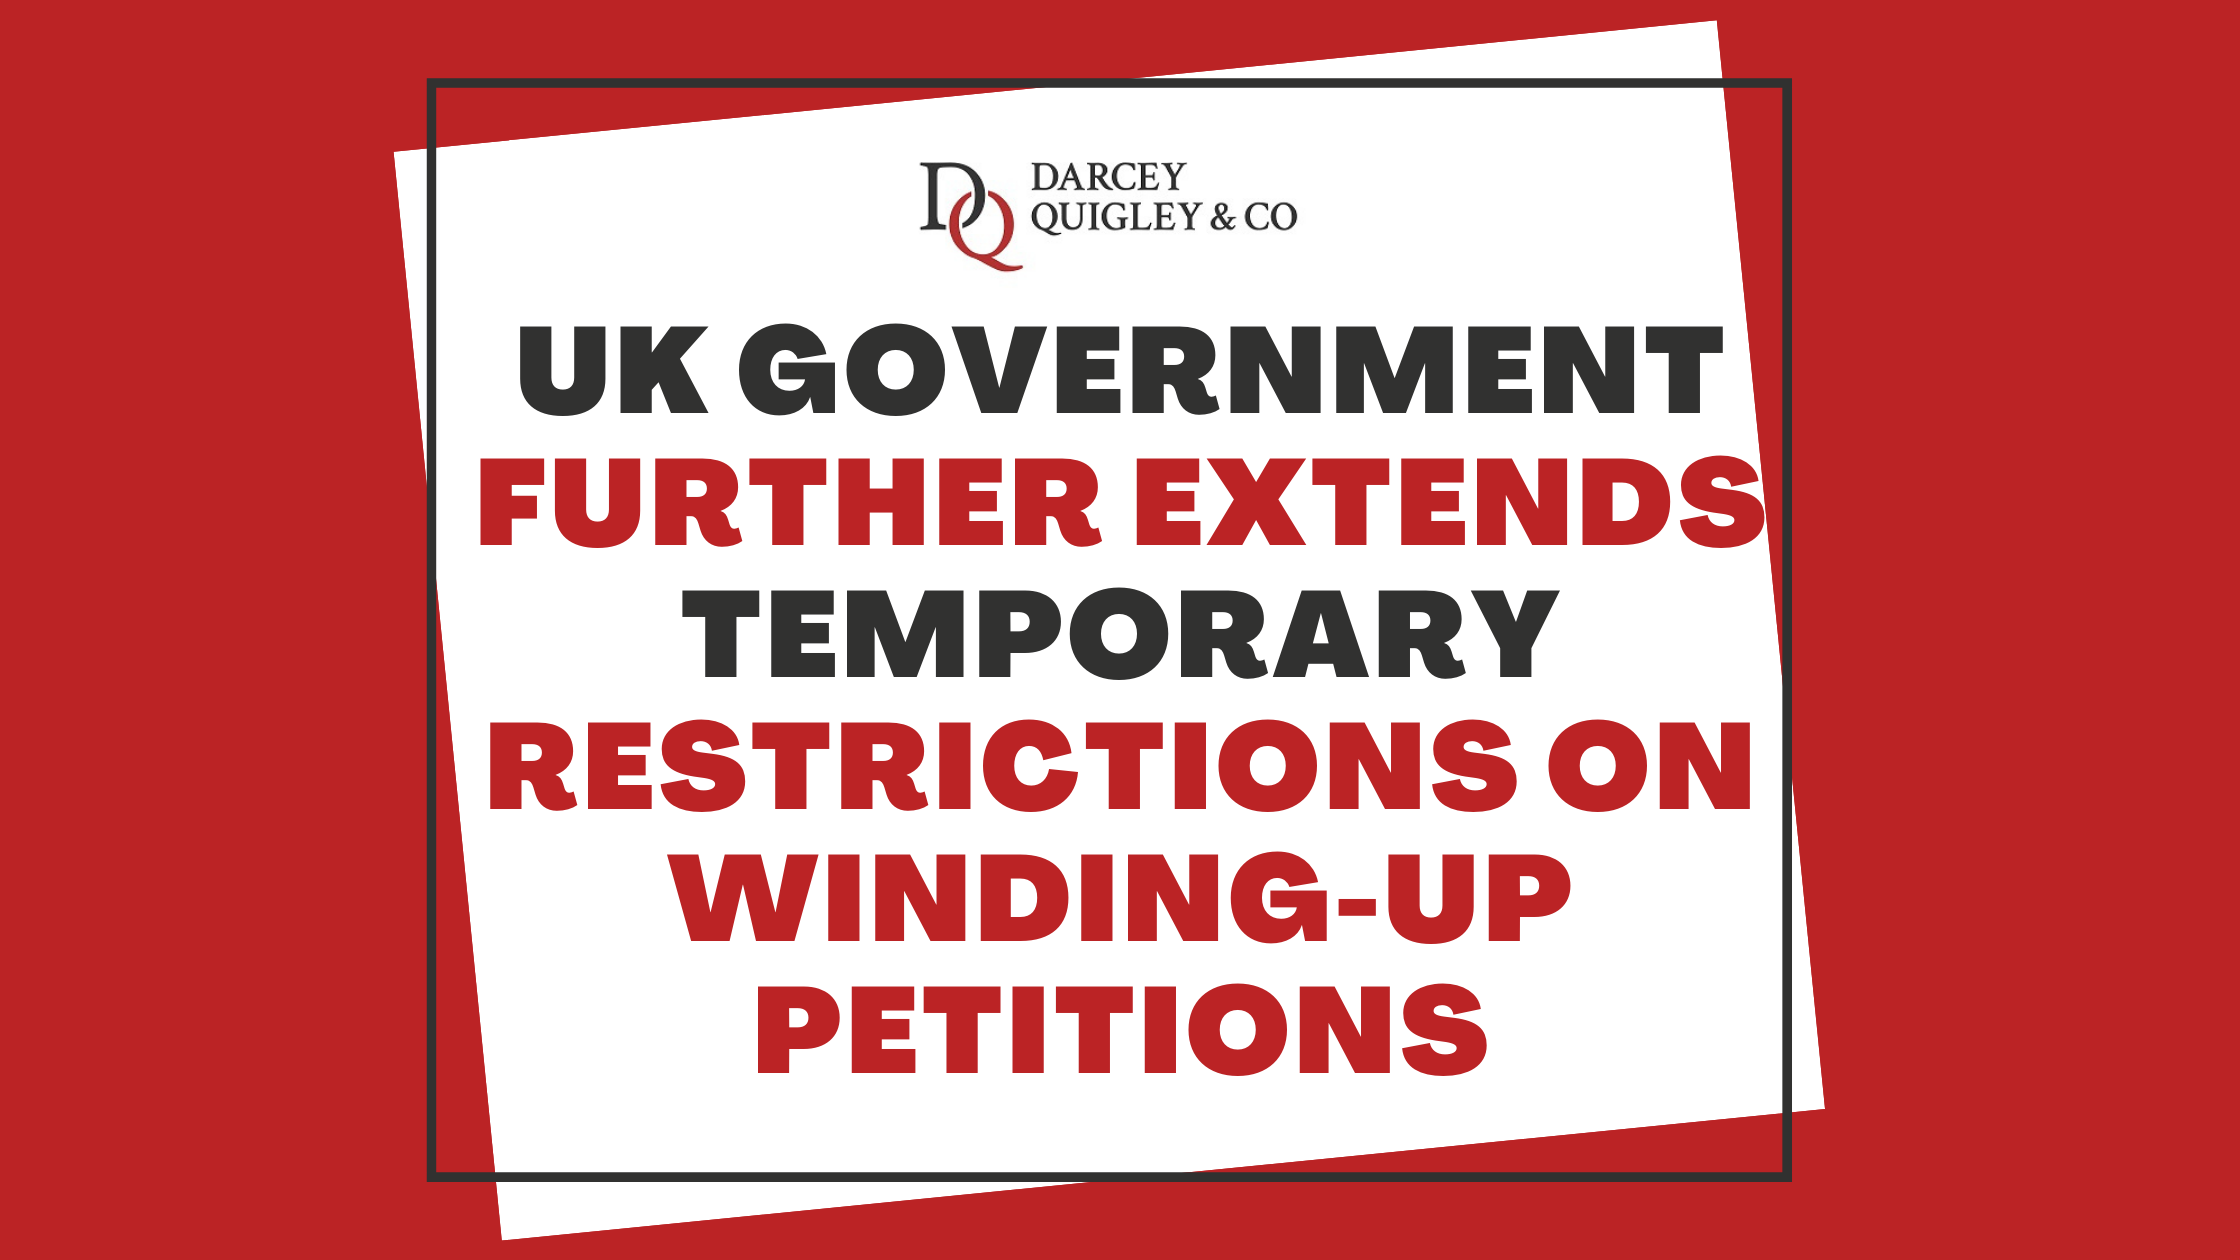 UK Government Further Extends Temporary Restrictions on Winding-up Petitions